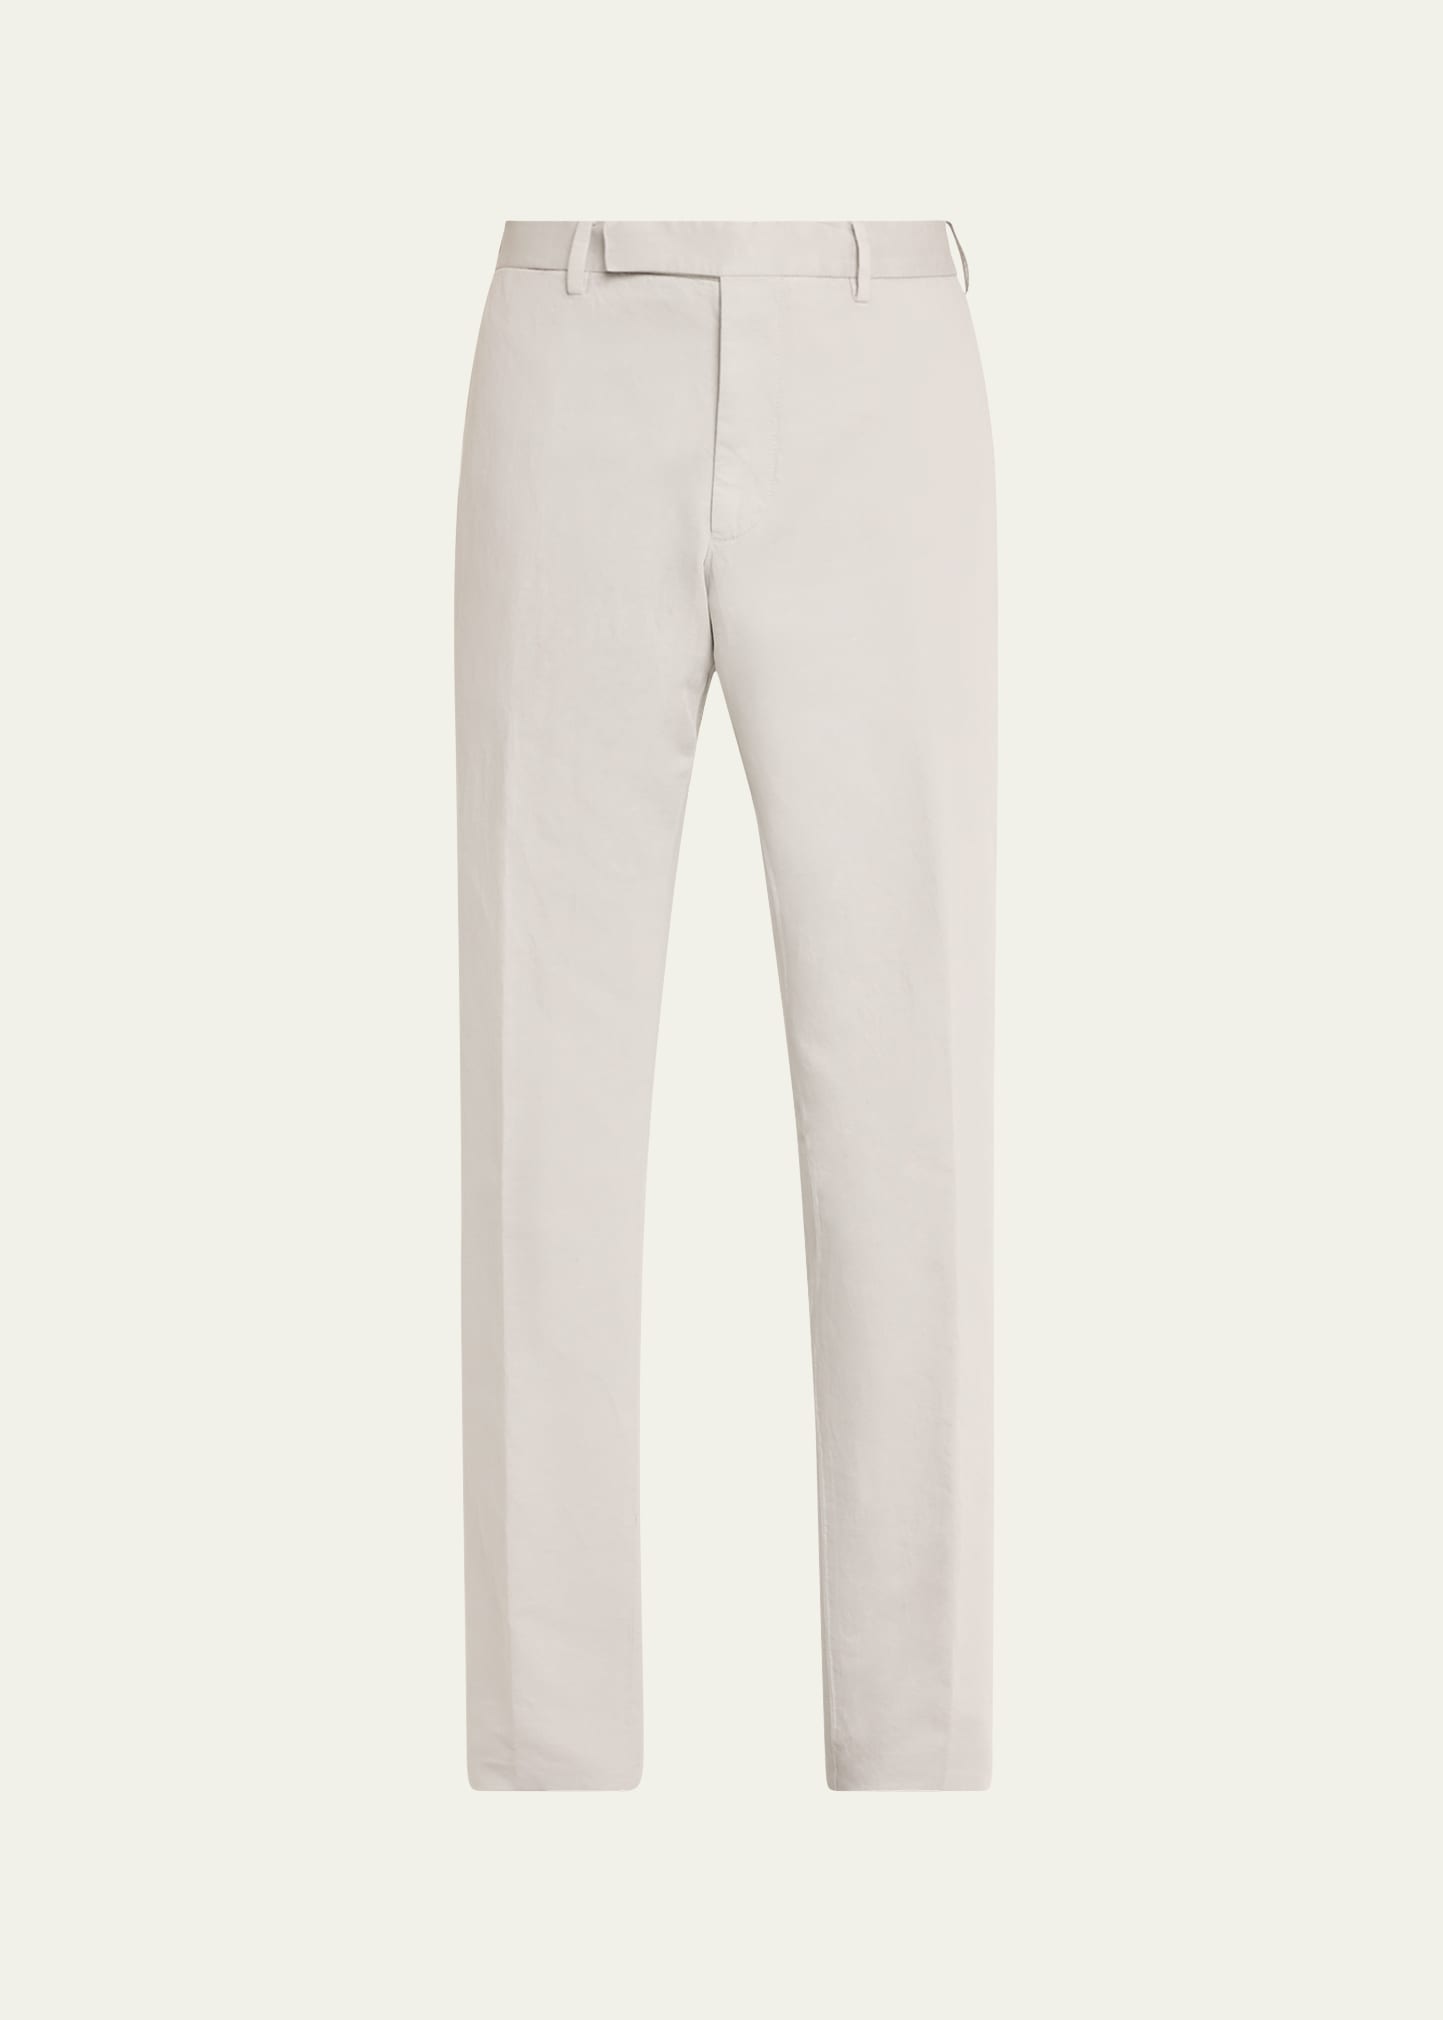 Shop Zegna Men's Summer Cotton-linen Chino Pants In Lt Gry Sld